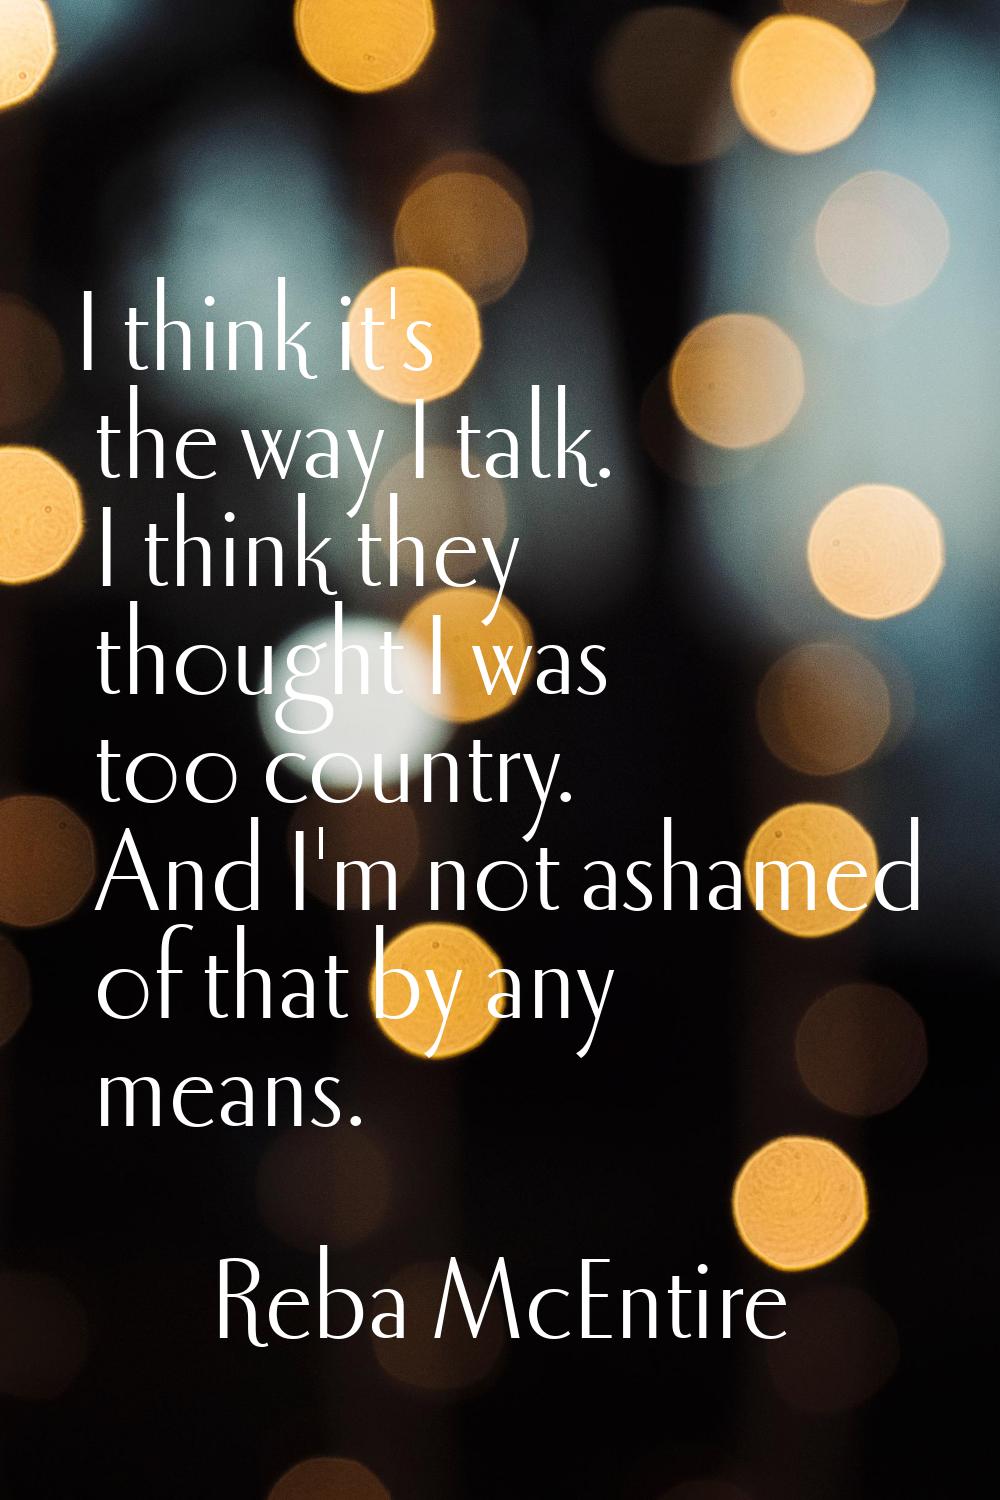 I think it's the way I talk. I think they thought I was too country. And I'm not ashamed of that by